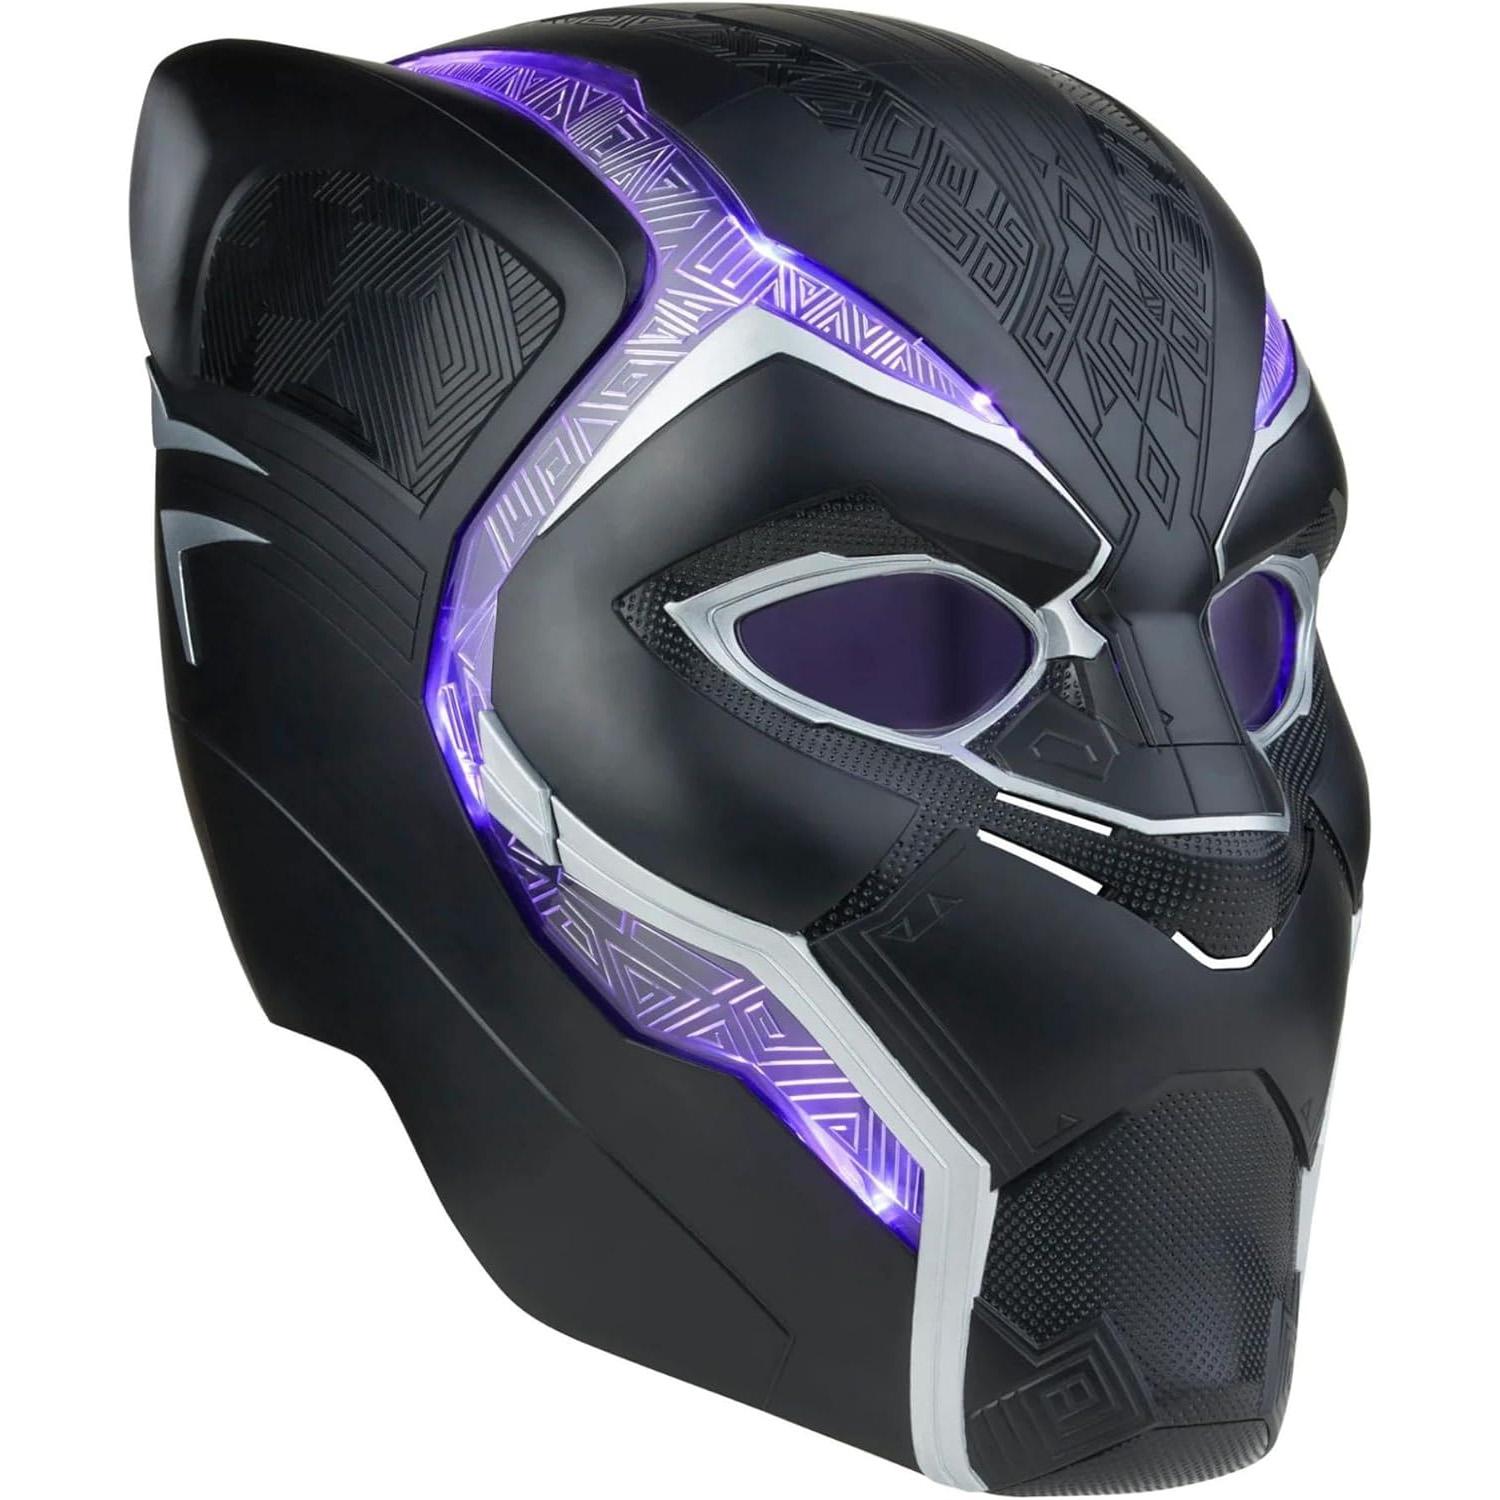 Marvel Legends Black Panther Electronic Roleplay Helmet for $49.41 Shipped